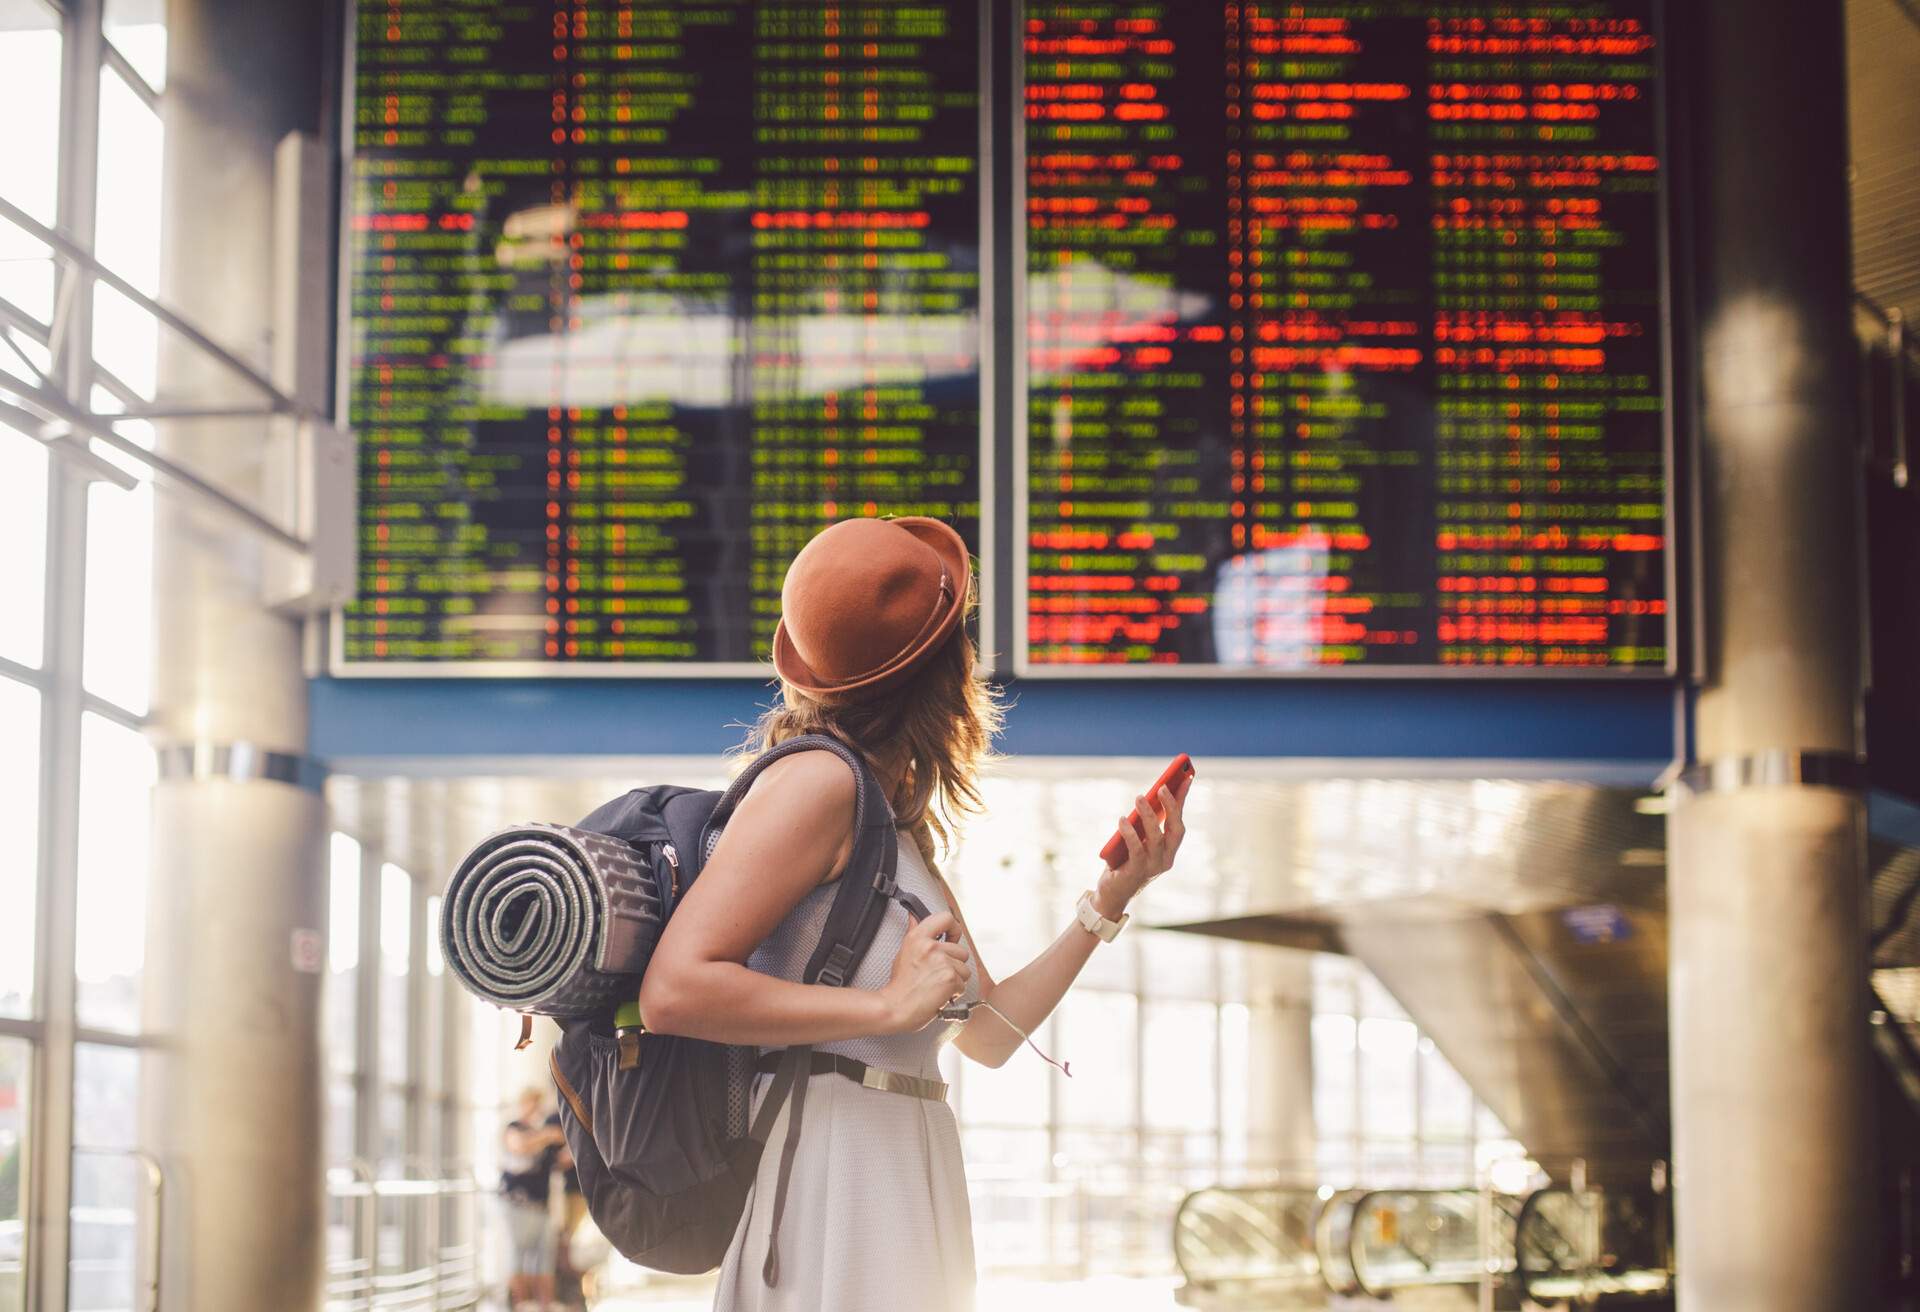 theme_people_woman_at_a_train_station_shutterstock